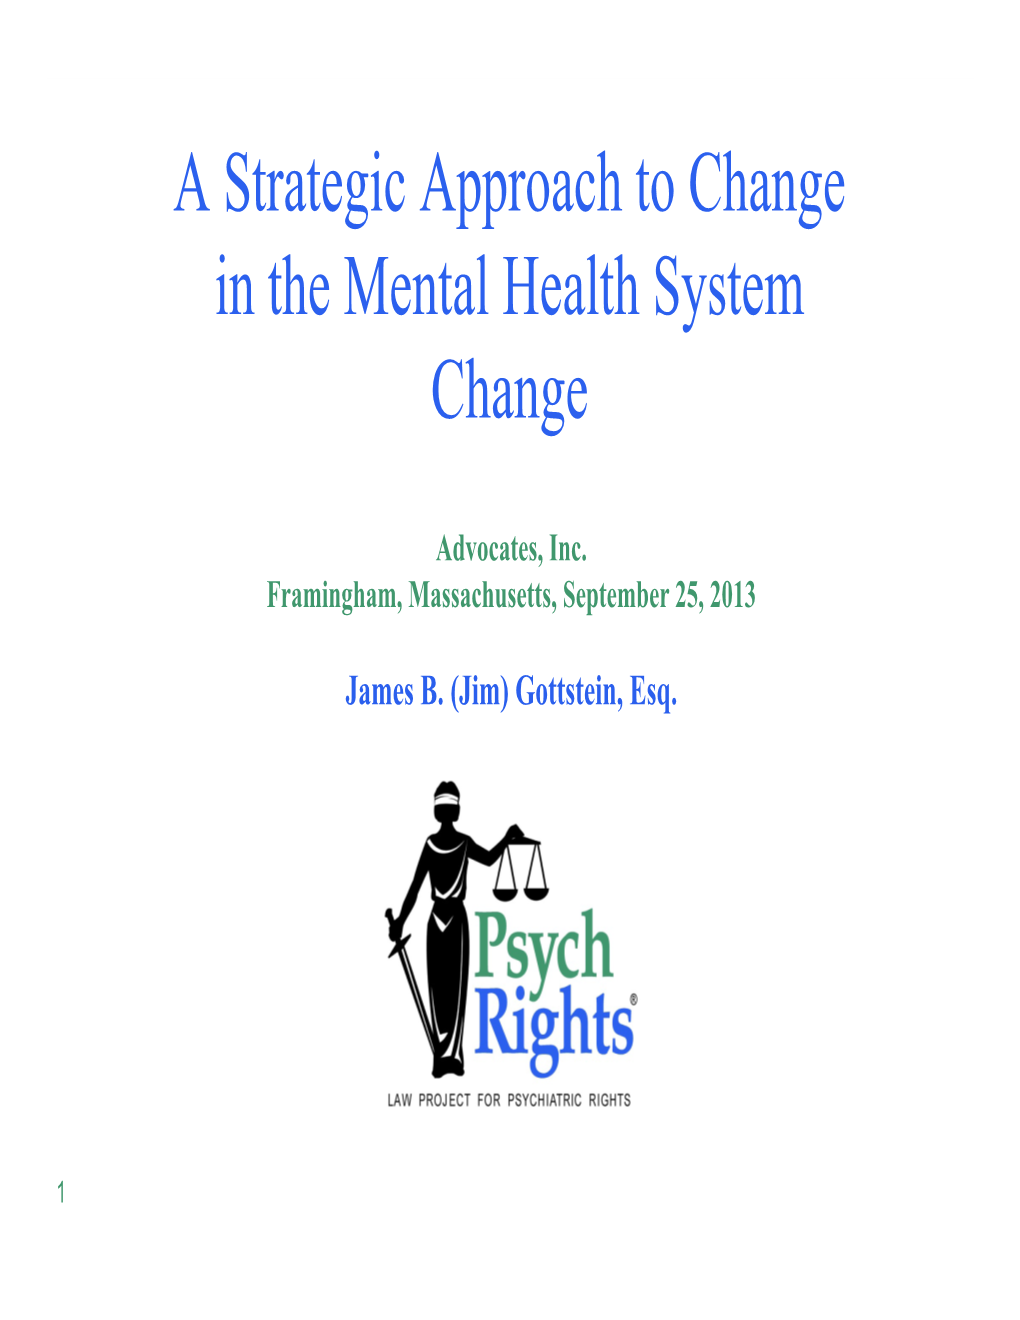 A Strategic Approach to Change in the Mental Health System Change